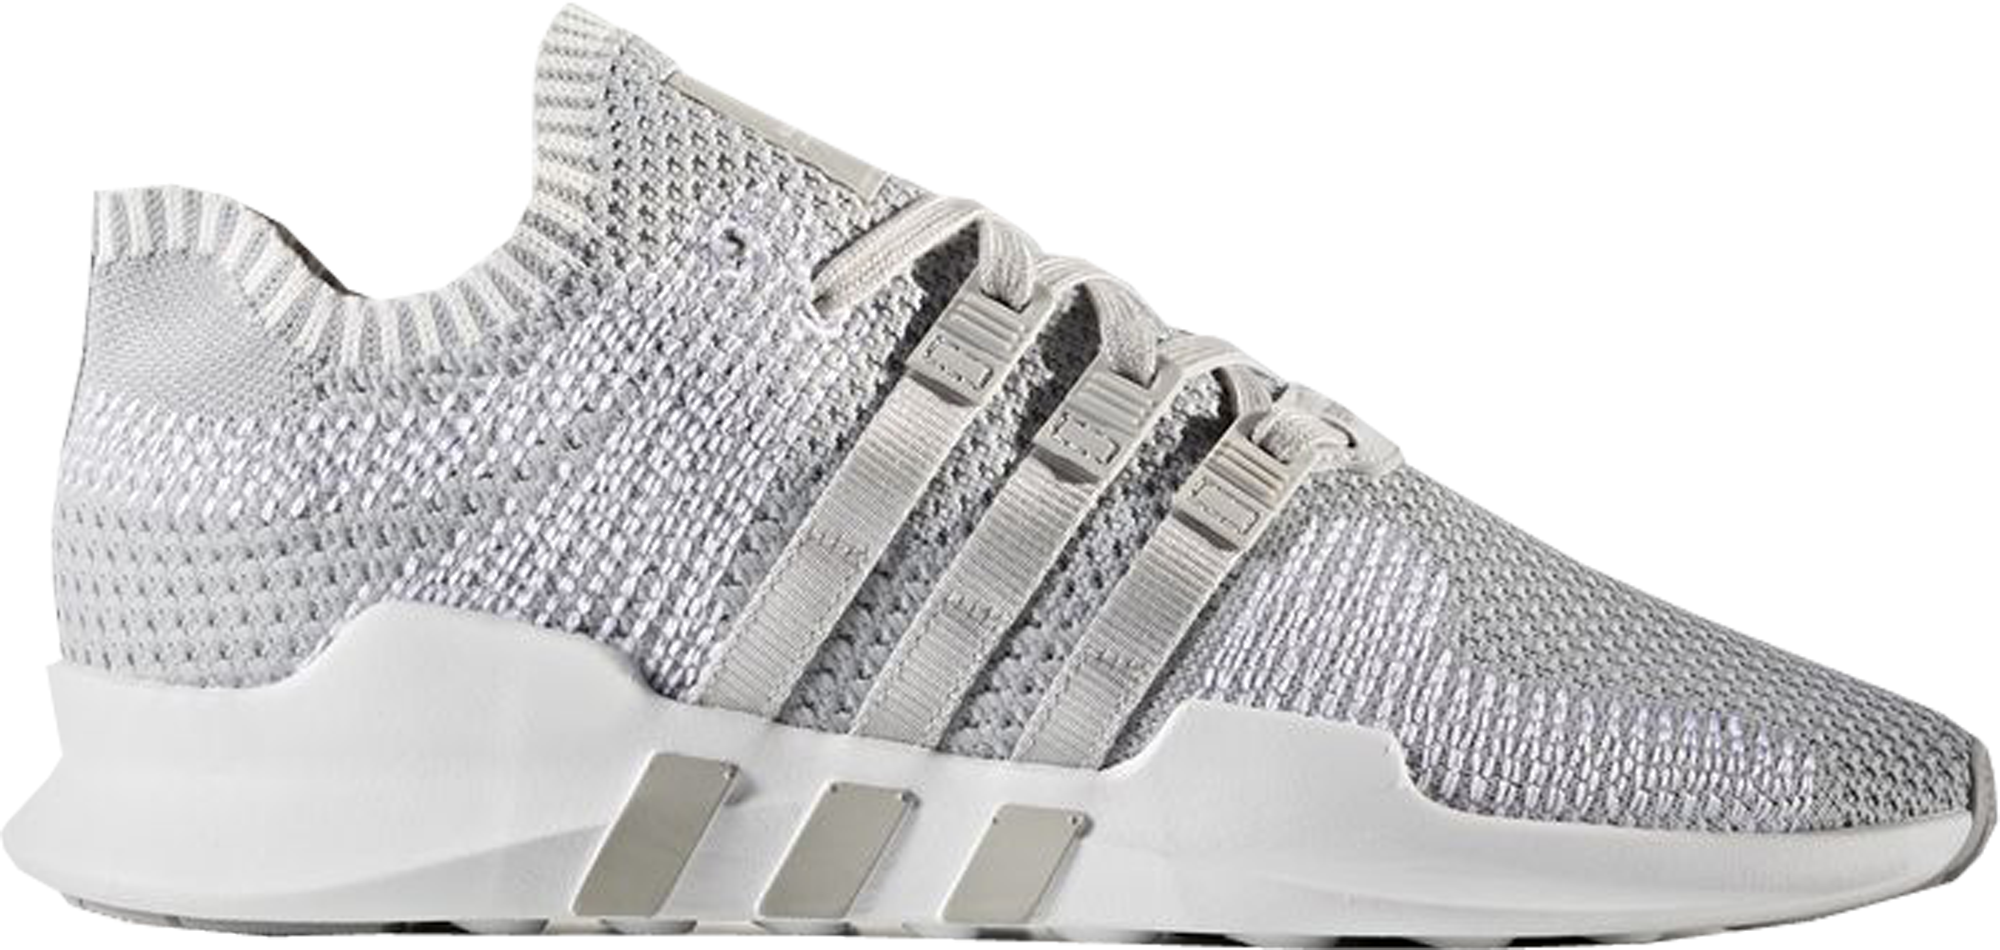 adidas EQT Support Adv Grey Two - BY9392